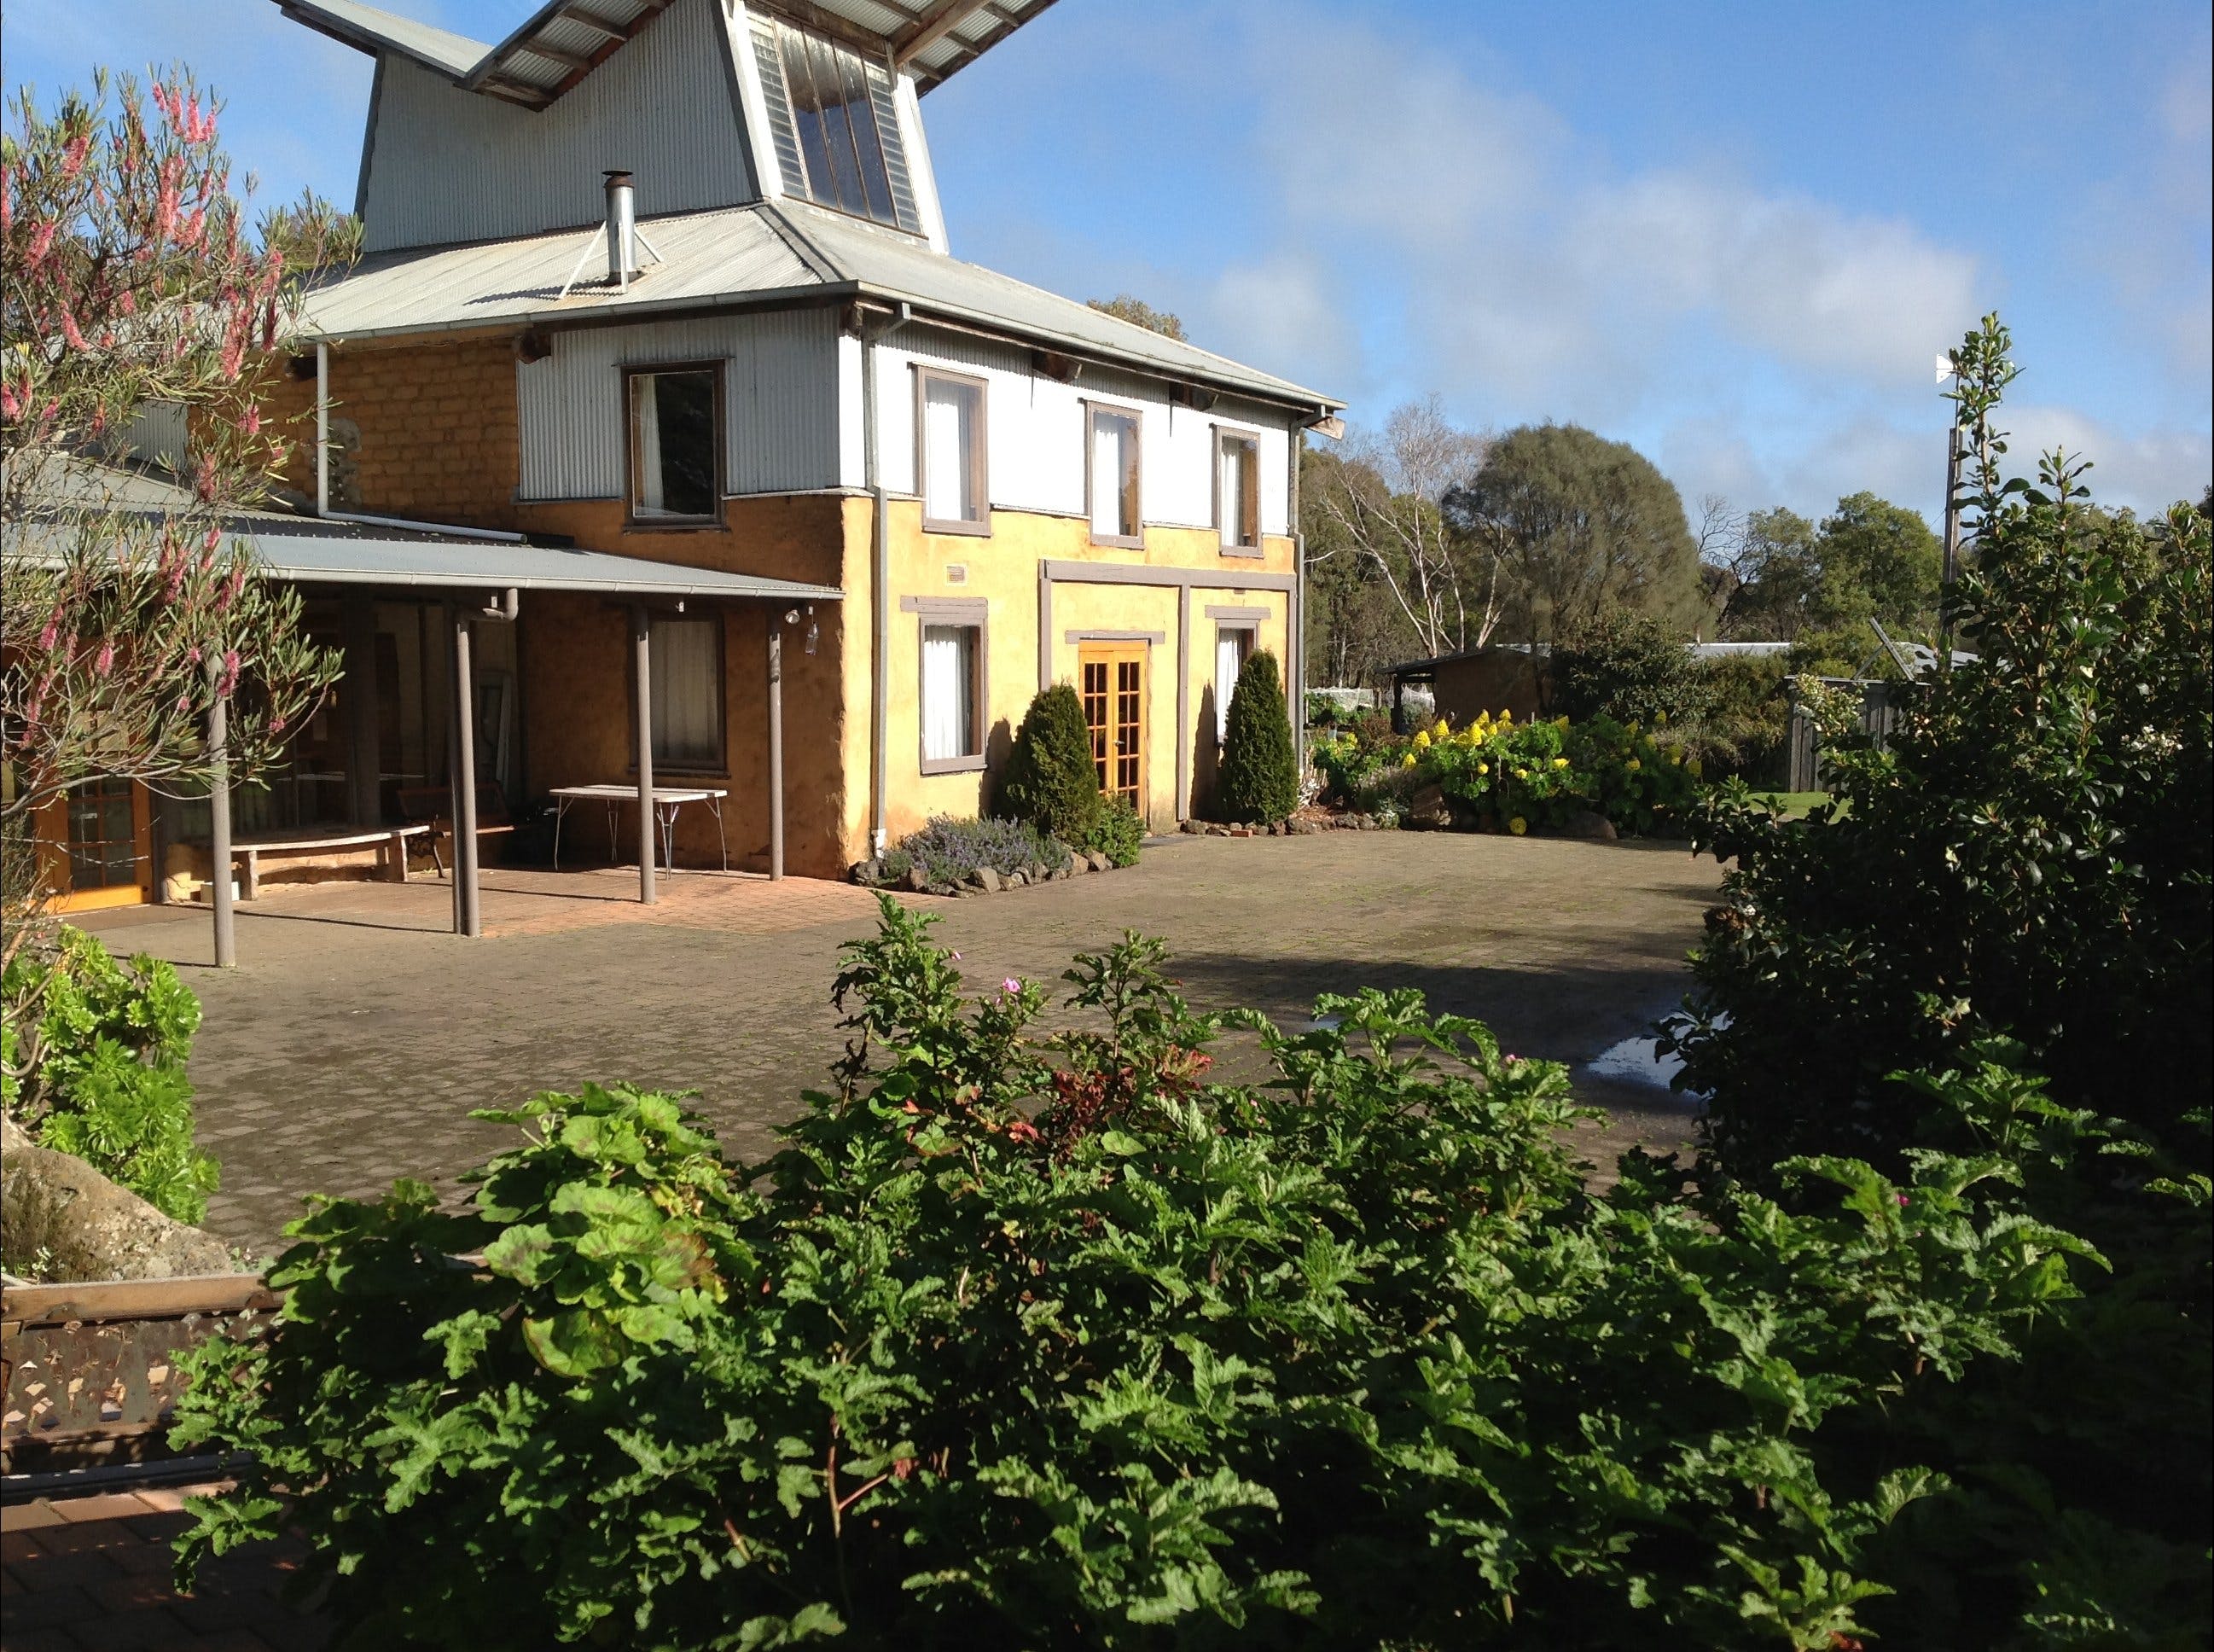 HIRL Hamilton Institute of Rural Learning - Geraldton Accommodation